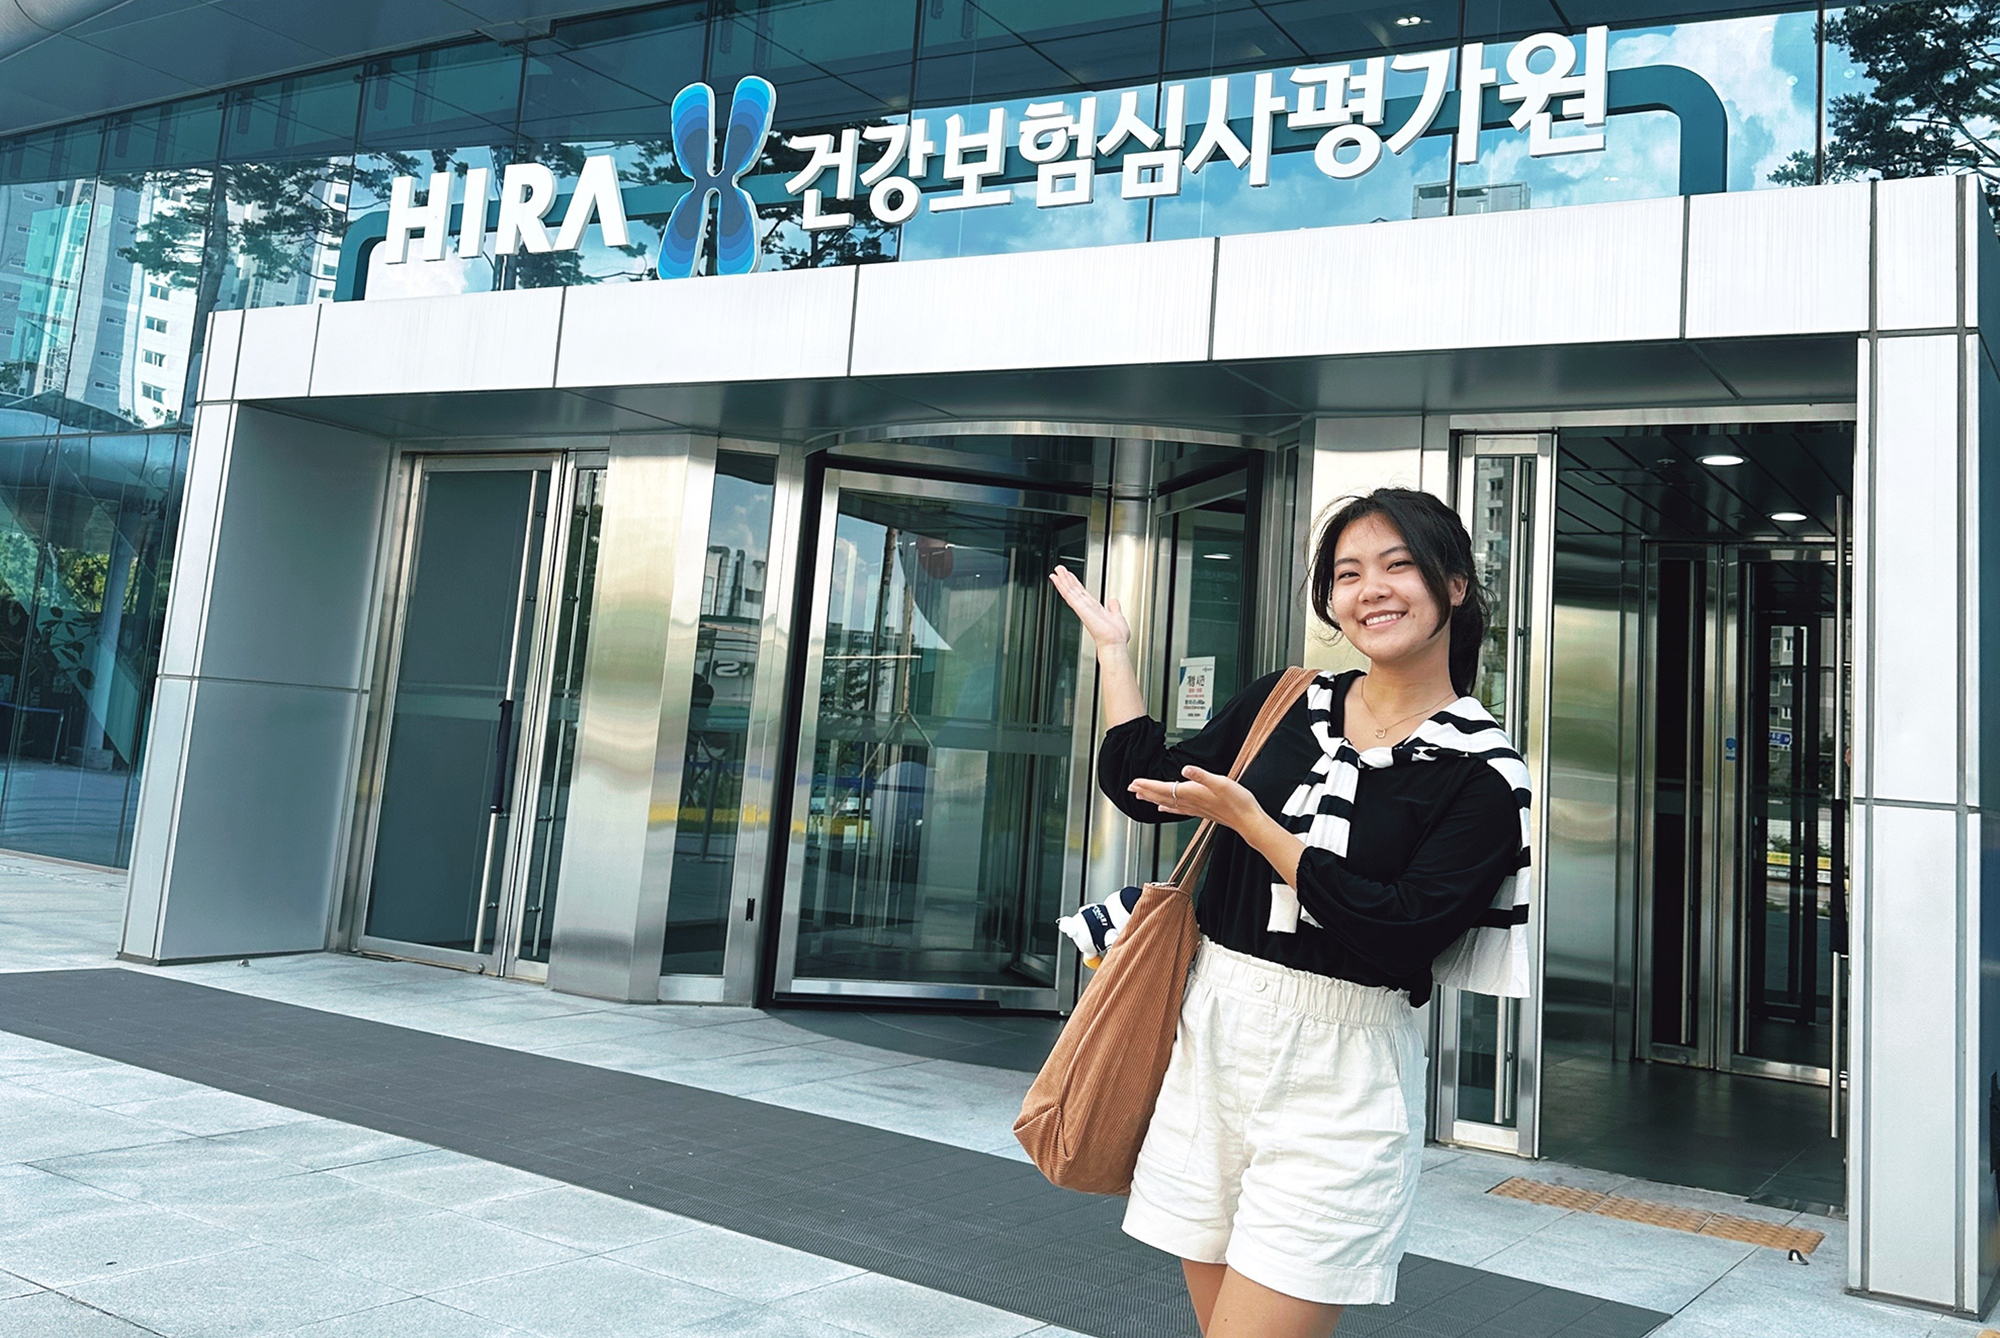 Penn undergrad Claire Jun gestures to the sign on the front of the building in Seoul, South Korea where she interned this summer.